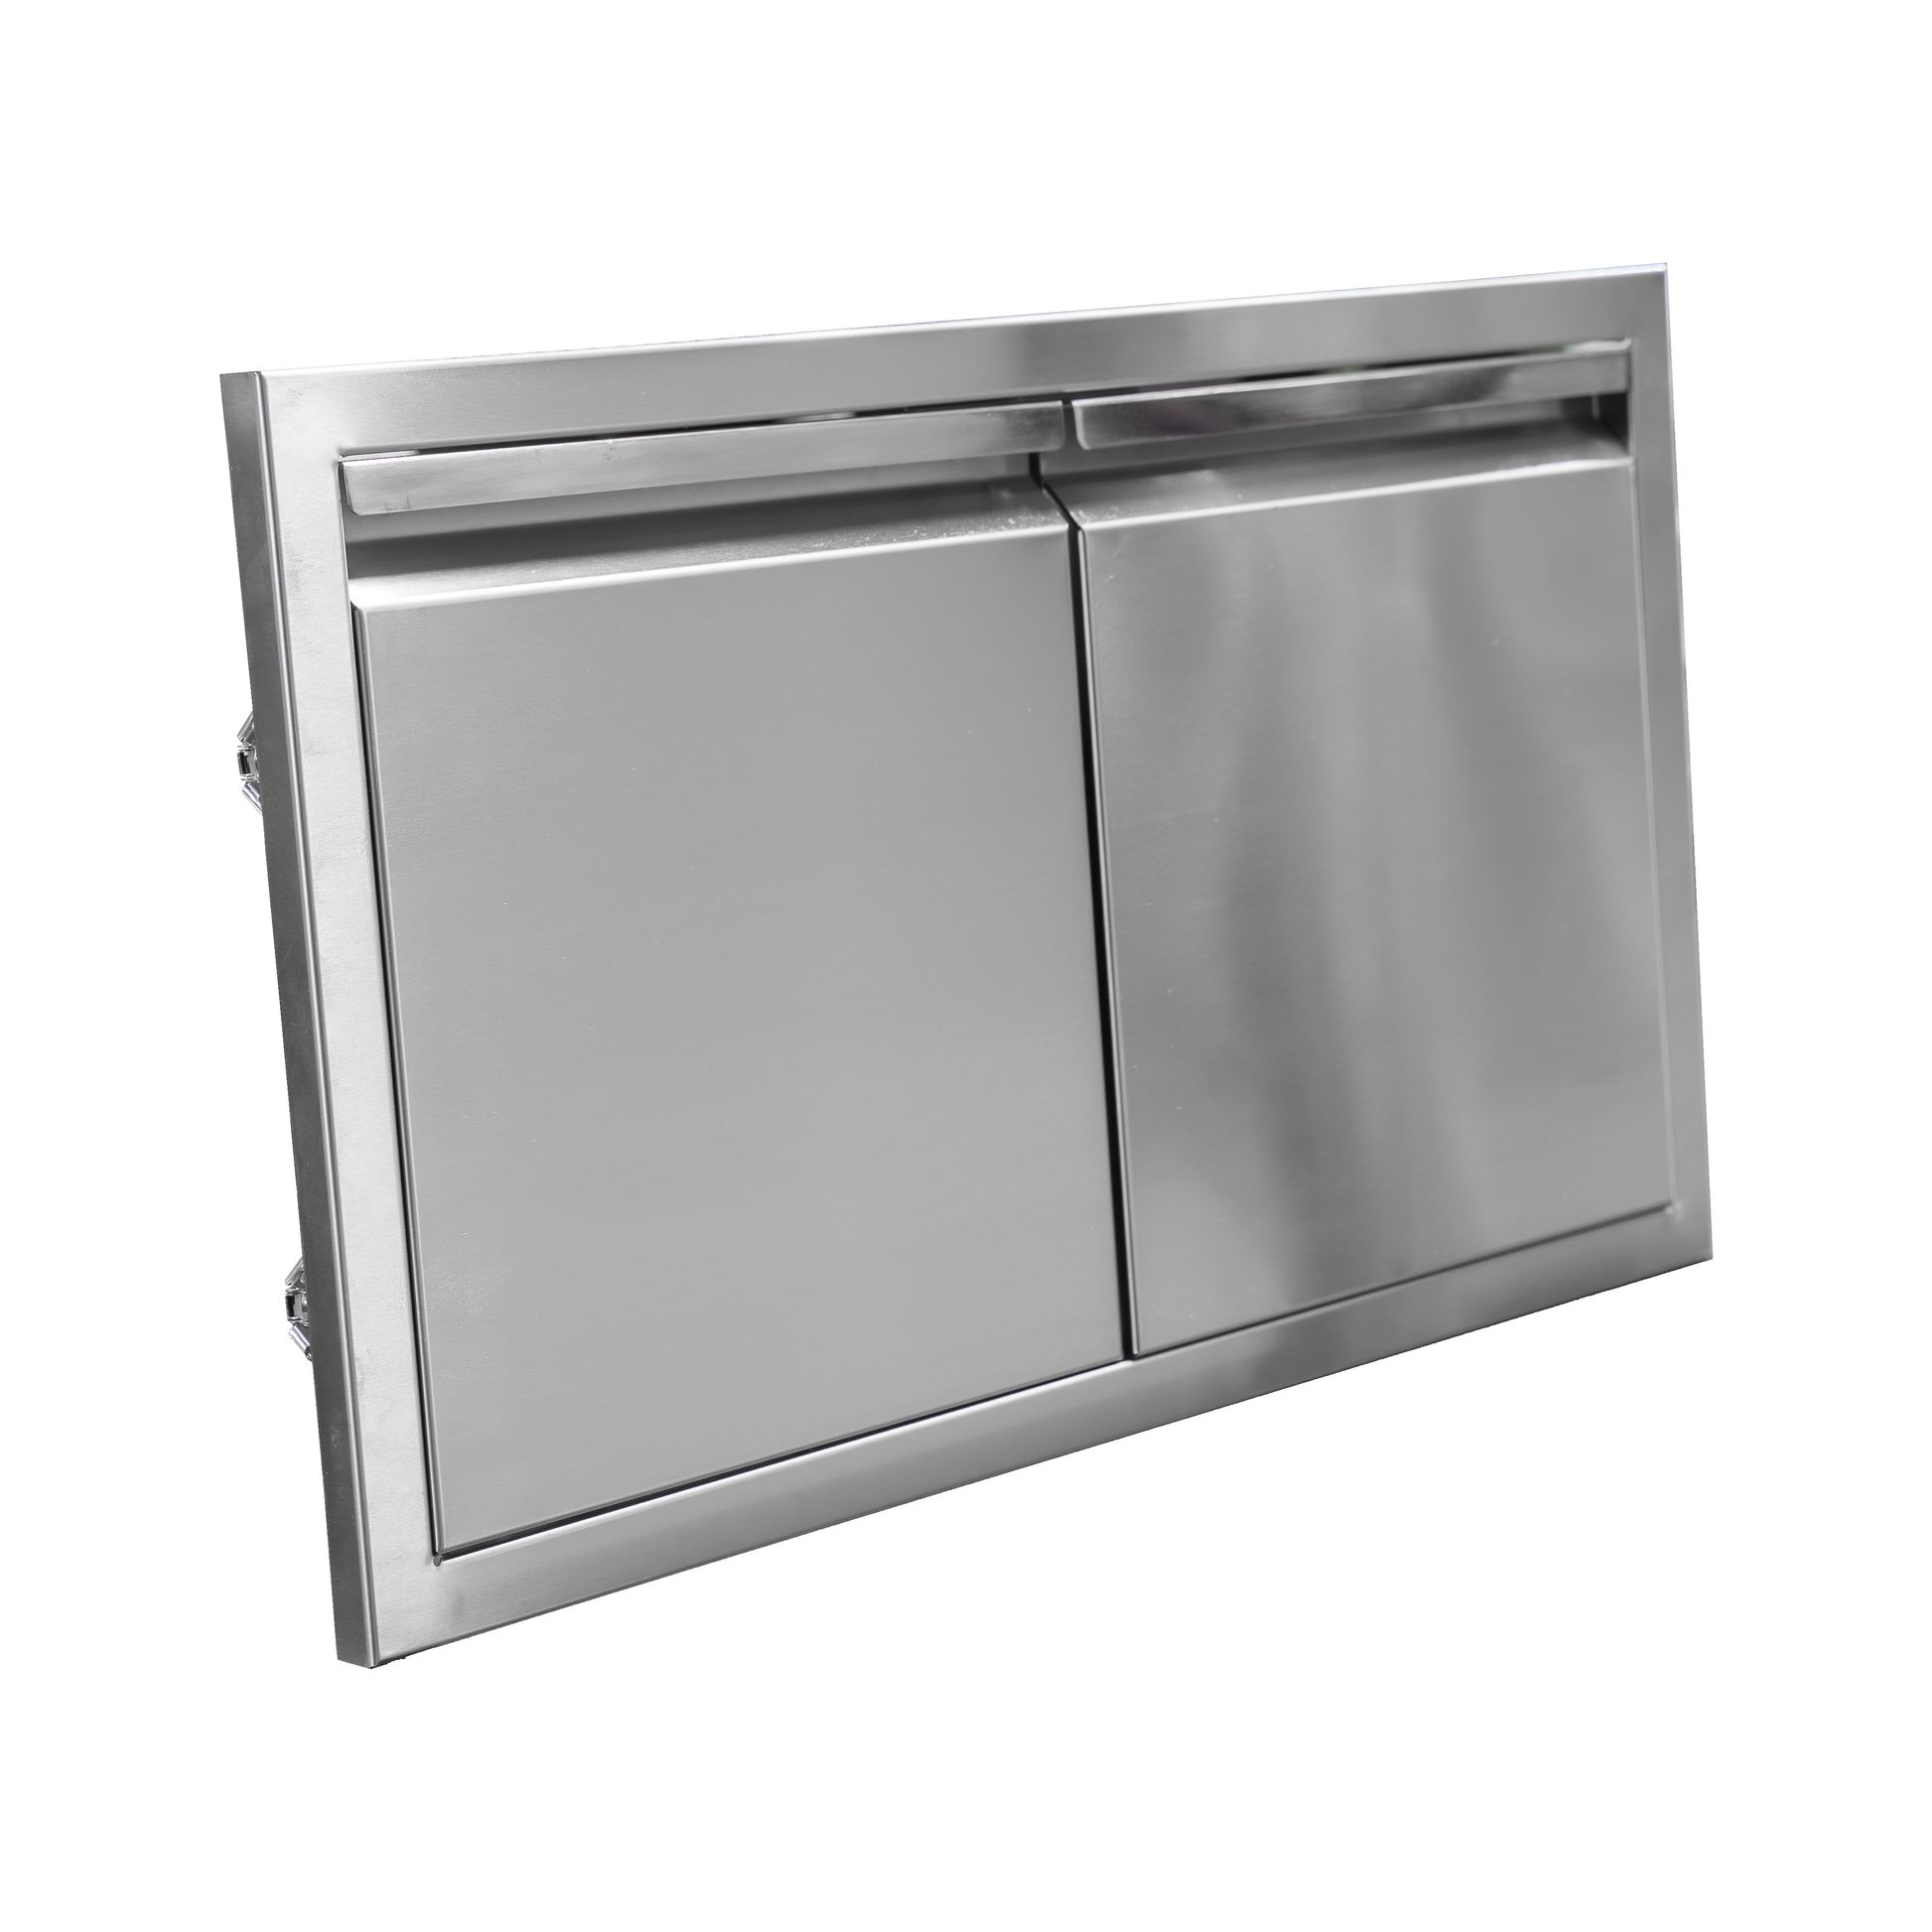 Diamond Grill BBQ 30" Stainless Steel Double Doors